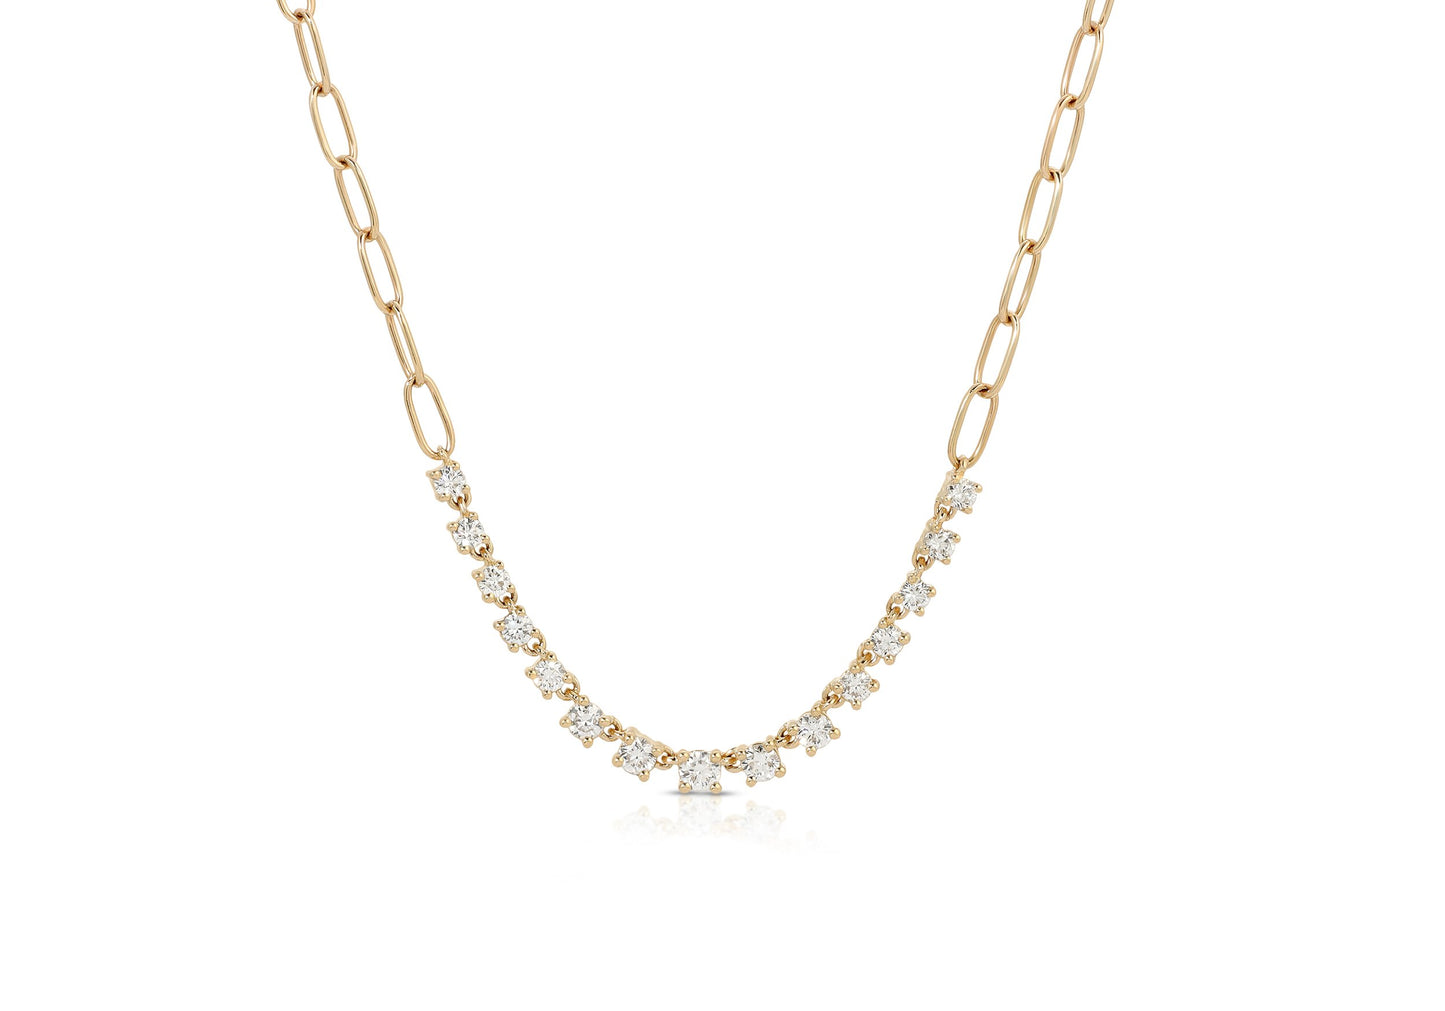 14K Yellow Gold Chain Link Necklace with Diamonds